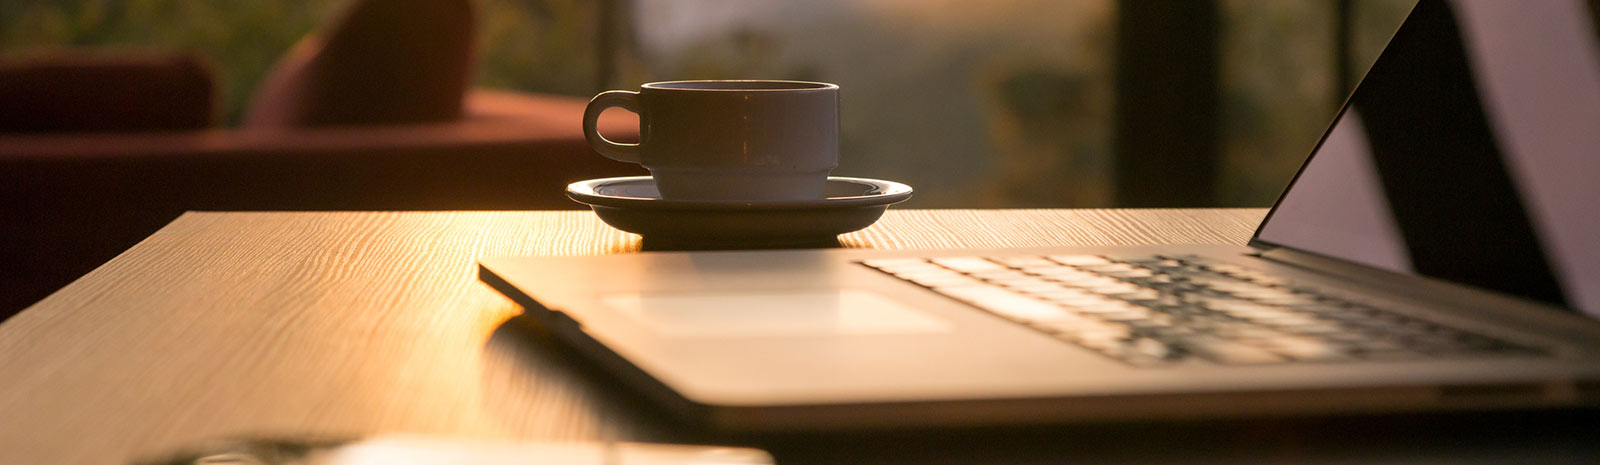 a laptop and coffee cup on a table